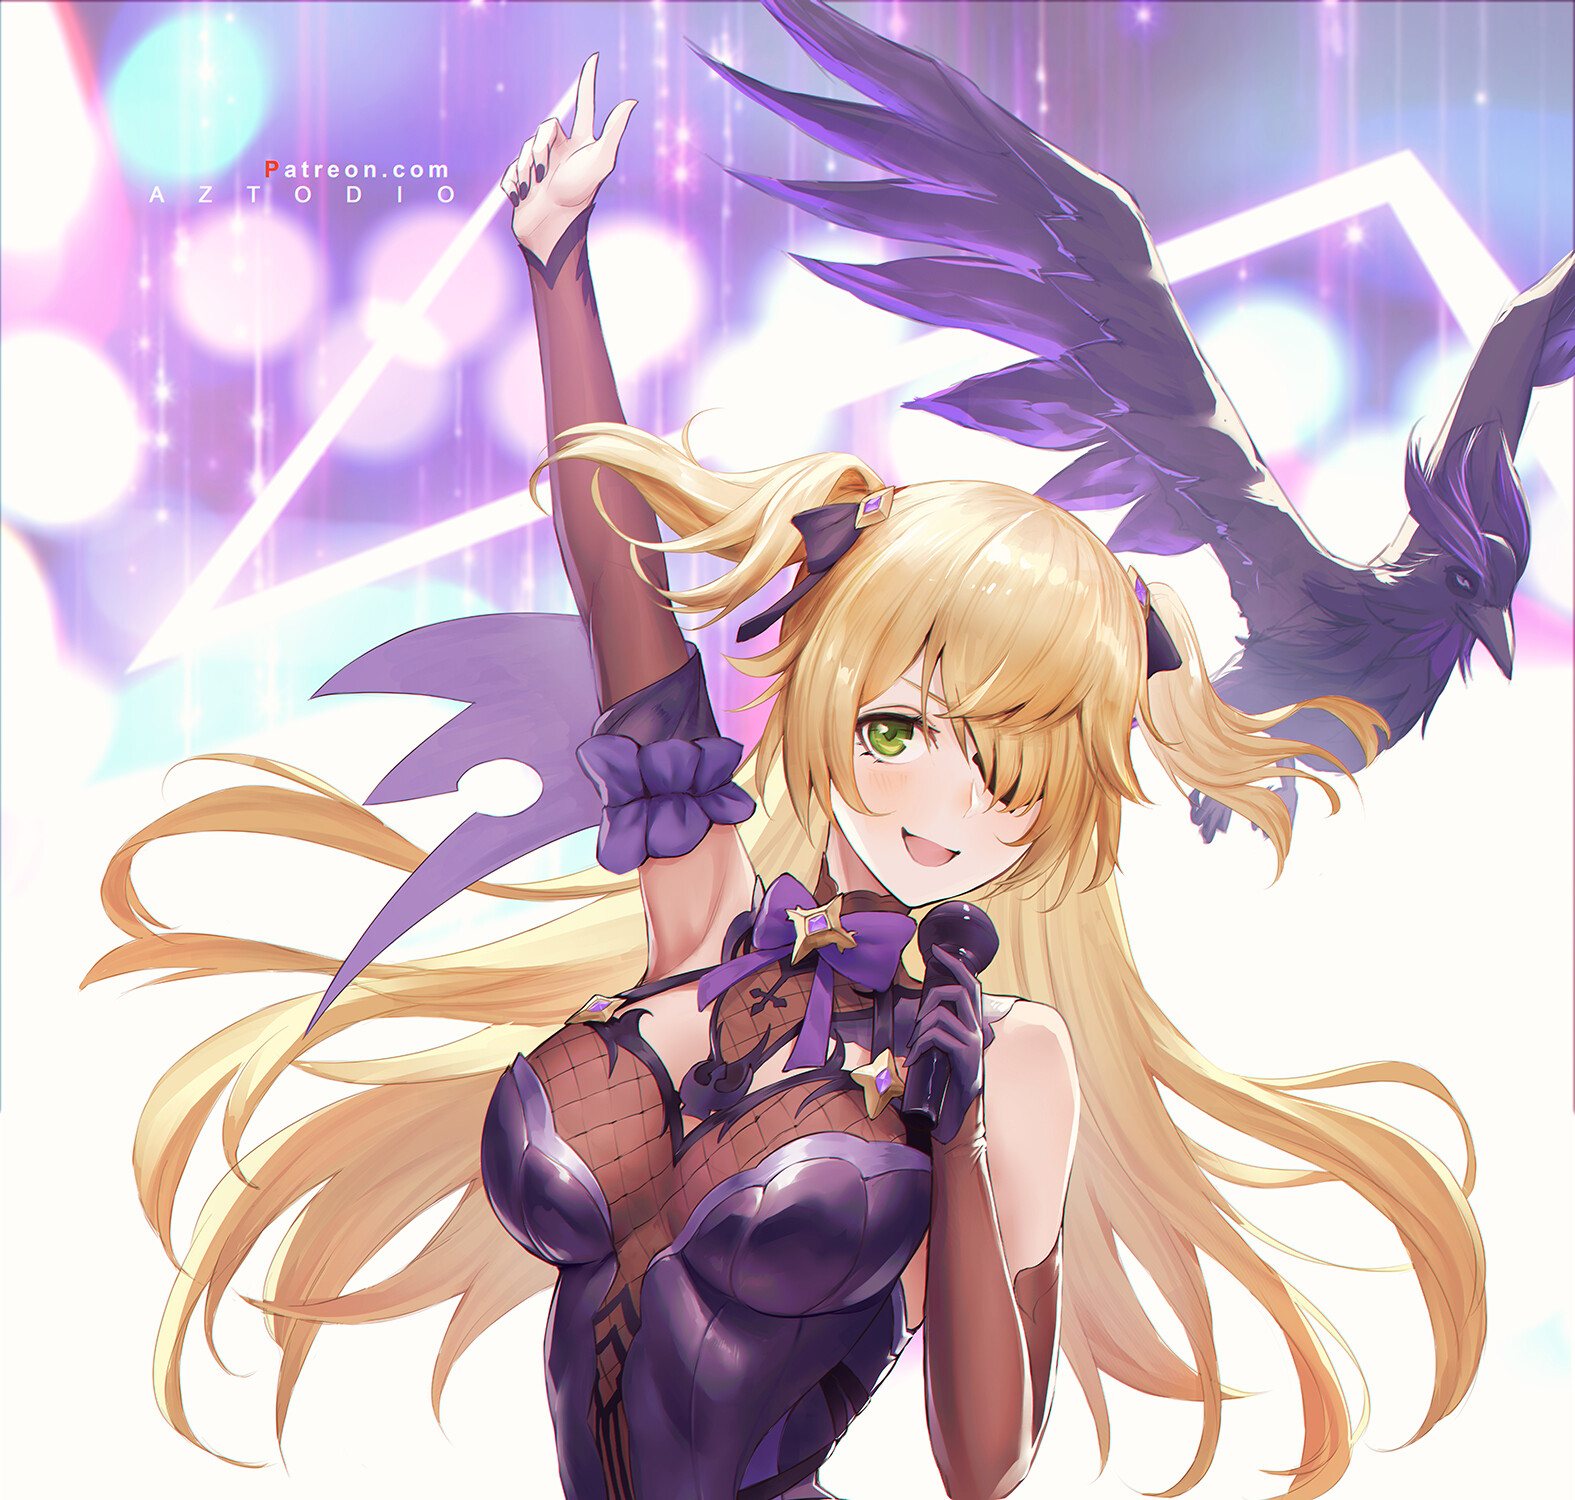 Anime 1575x1500 Azto Dio drawing Genshin Impact Fischl (Genshin Impact) blonde long hair green eyes raven purple bodysuit see-through clothing microphone sleeveless anime girls hair covering eyes singer music arms up birds animals open mouth looking at viewer eyepatches video game girls video game characters bright